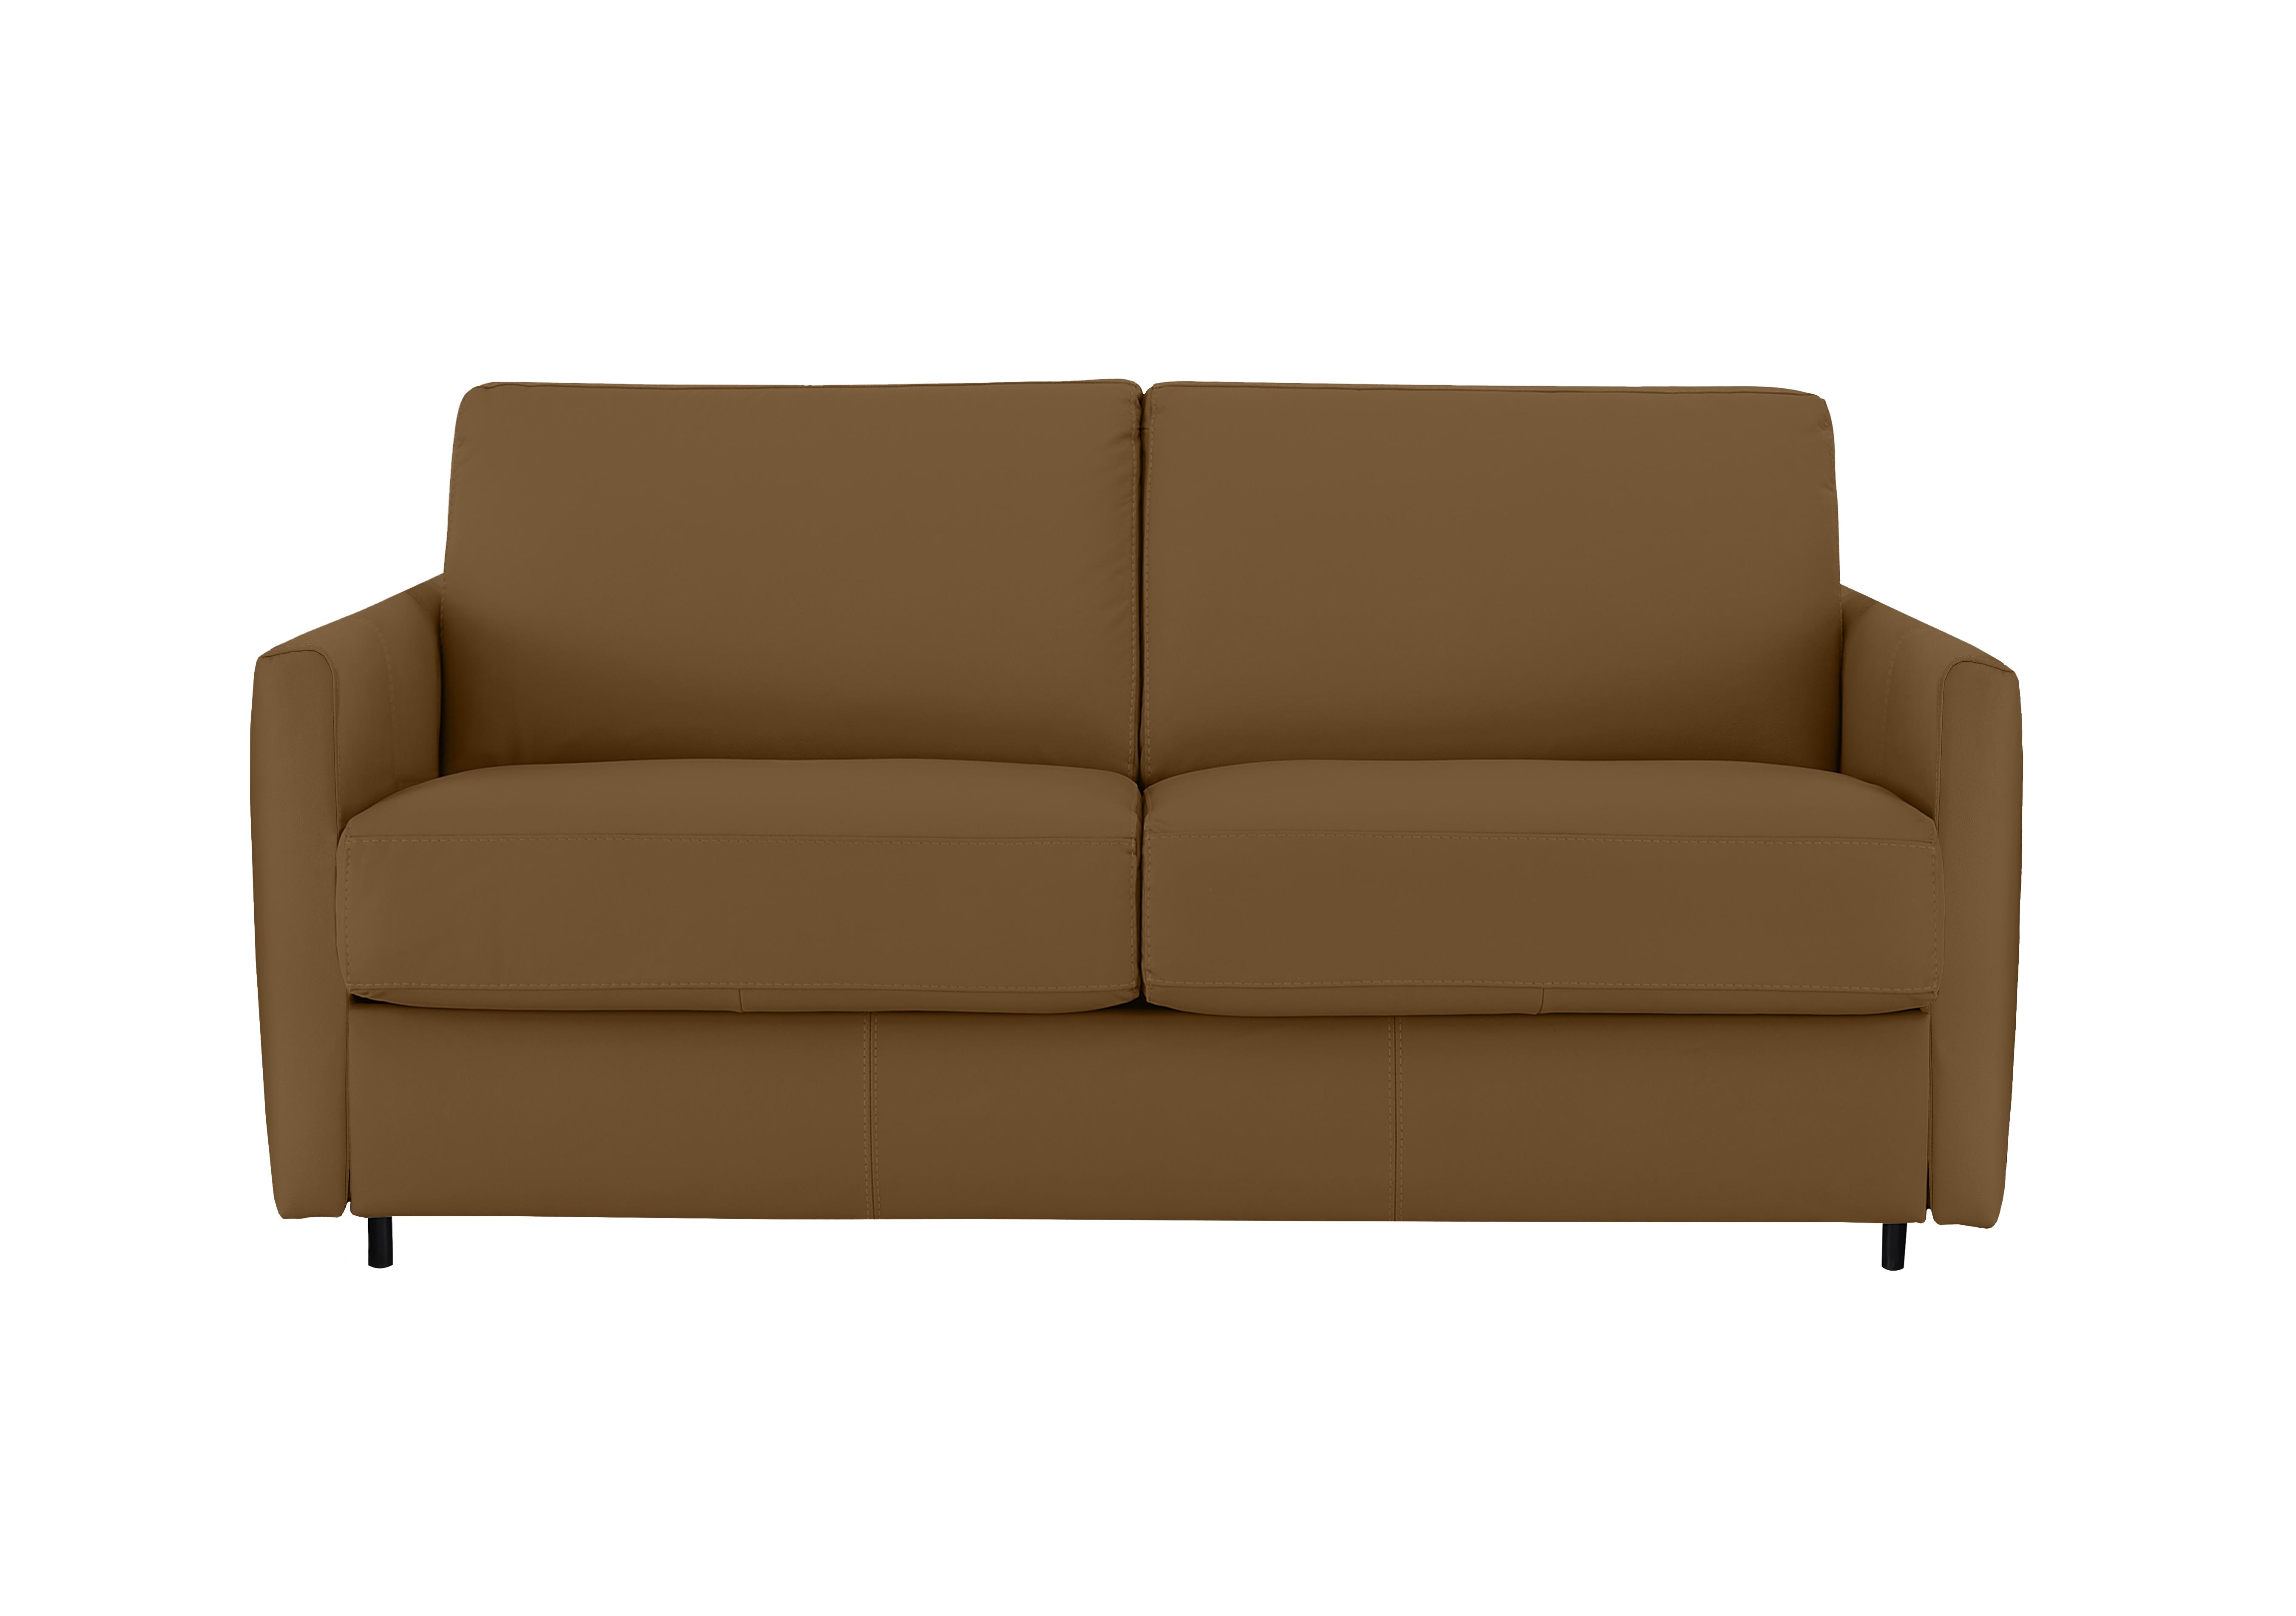 Alcova 2.5 Seater Leather Sofa Bed with Slim Arms in Botero Cuoio 2151 on Furniture Village